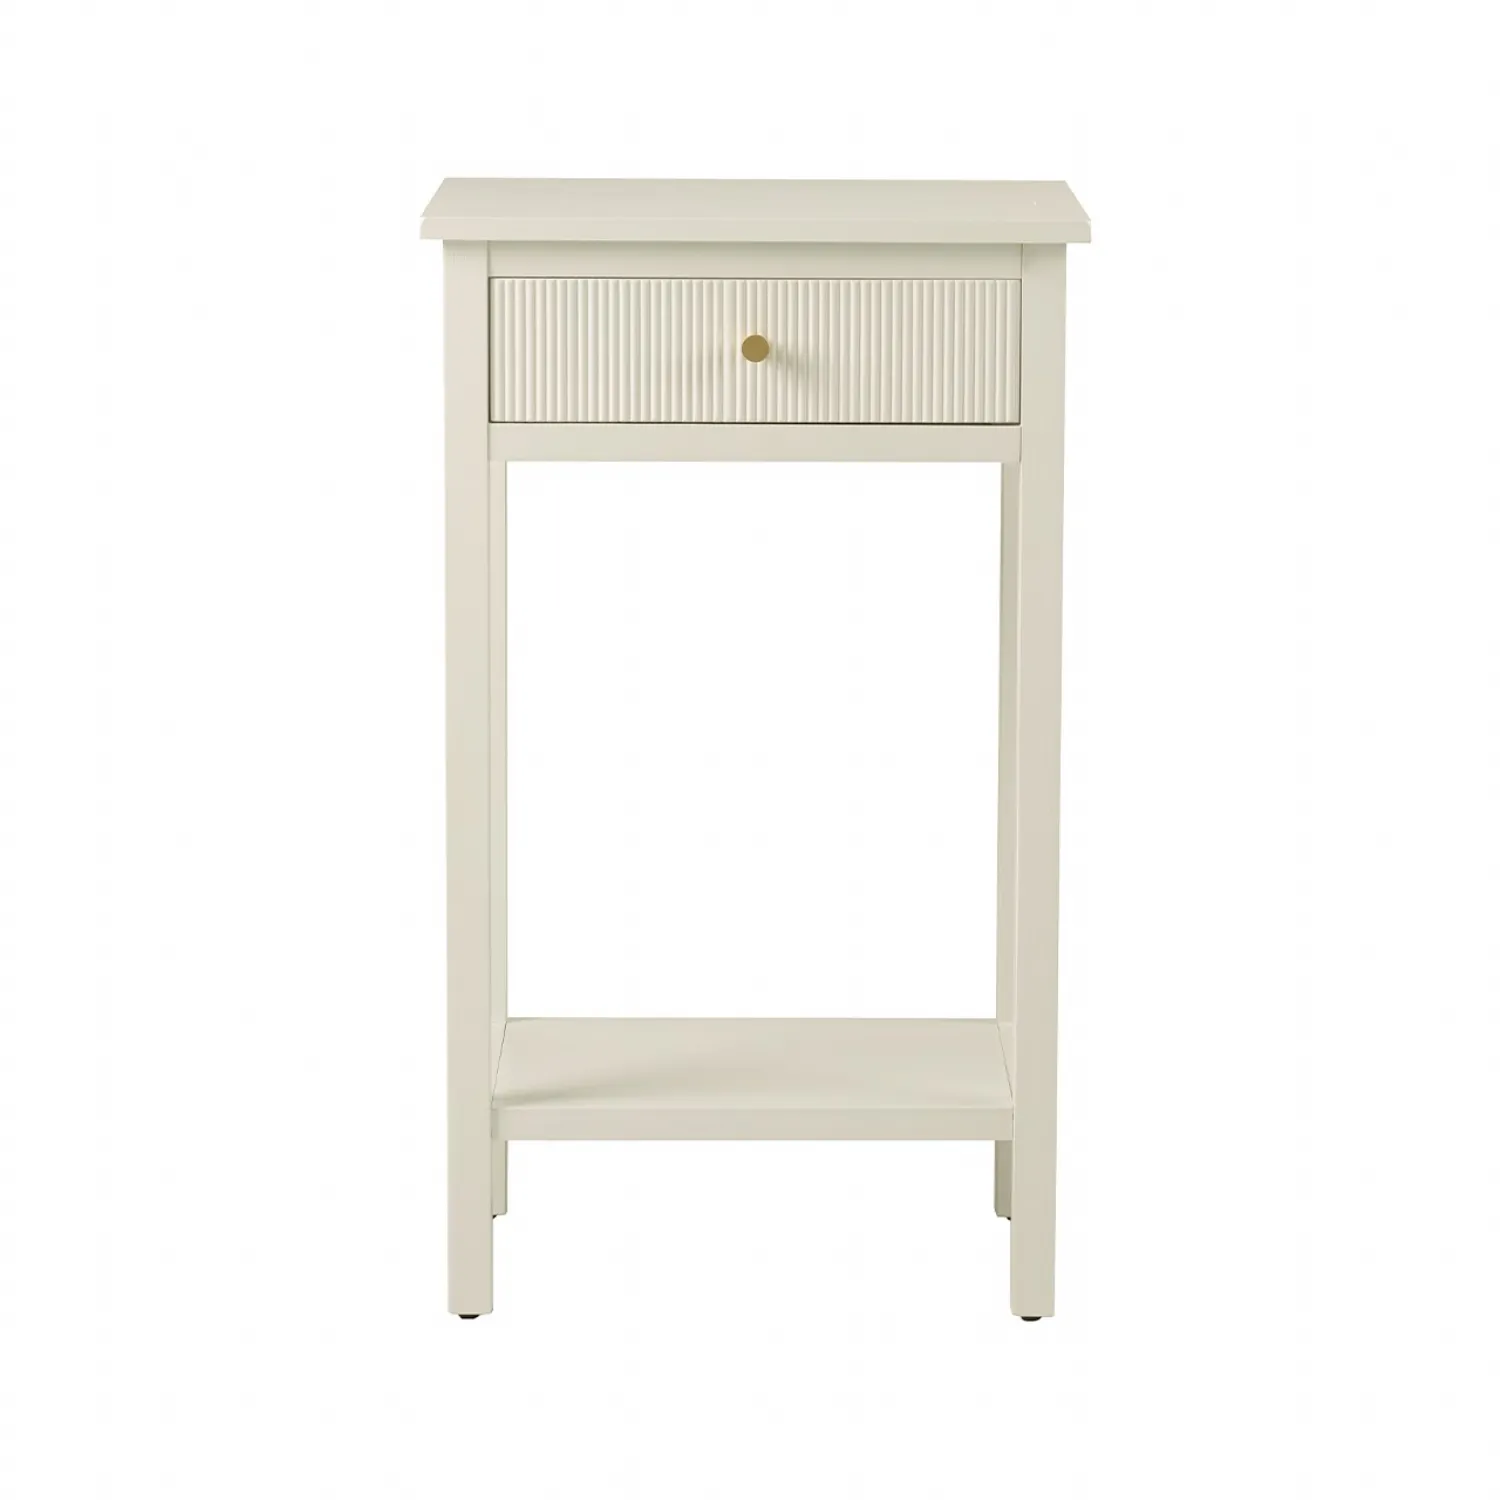 Lindon 1 Drawer End Table White With Gold Handles